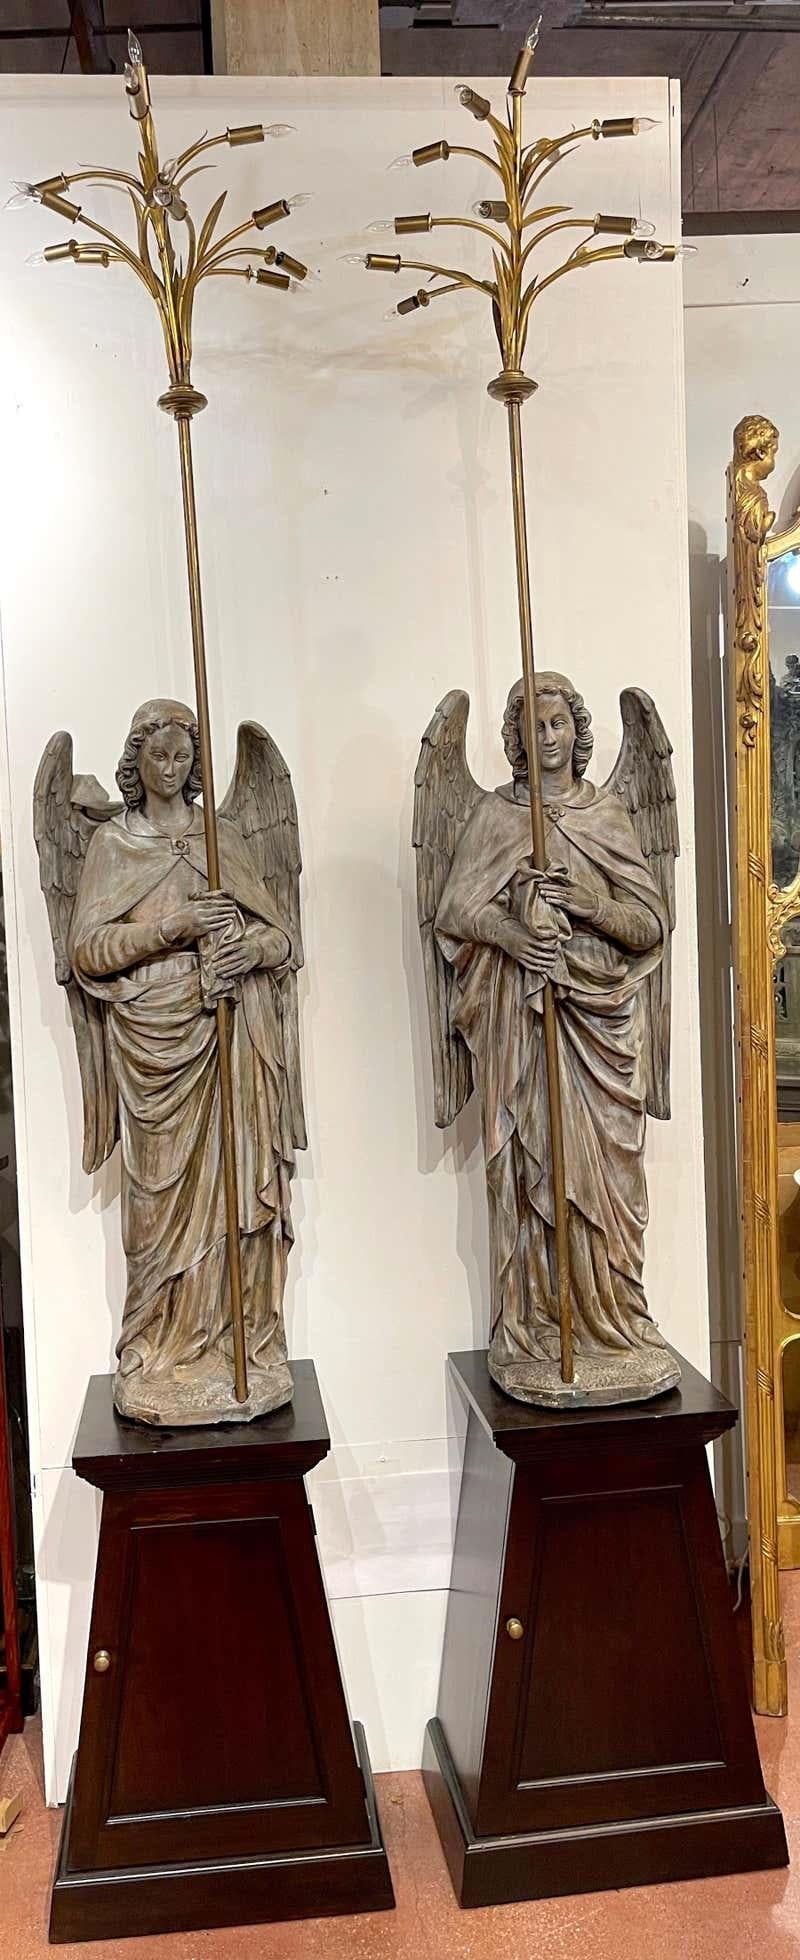 Pair of 12' polychromed plaster angel 14-light candelabra / lamps on pedestals
Subtle and dramatic, impressive in size and well executed.
Each angel stands 48